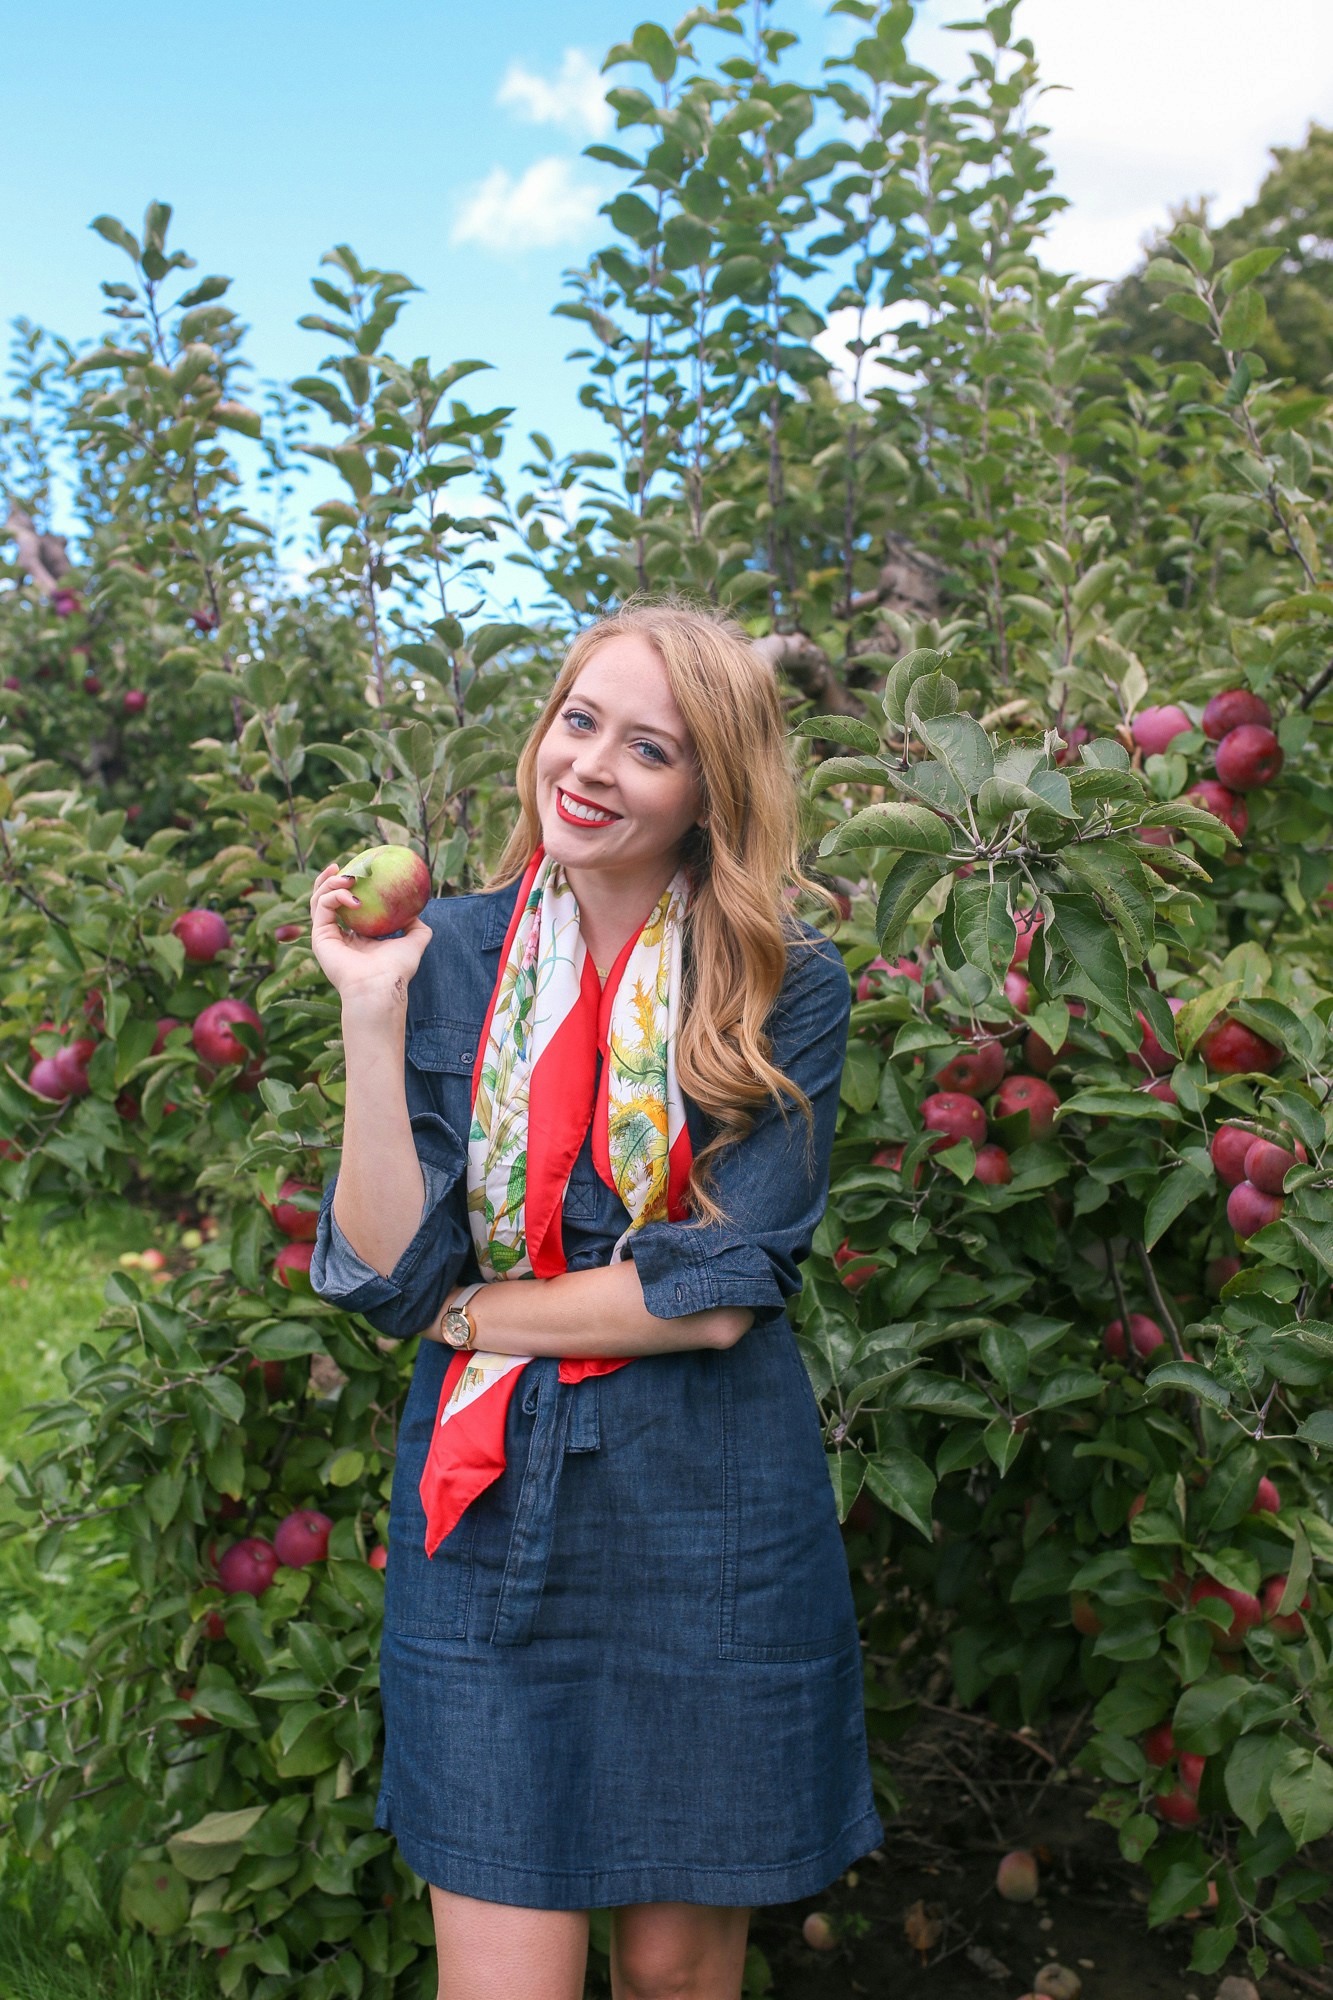 Apple picking outfit: a casual denim dress is more sophisticated with a vintage silk scarf in a festive fall colour.